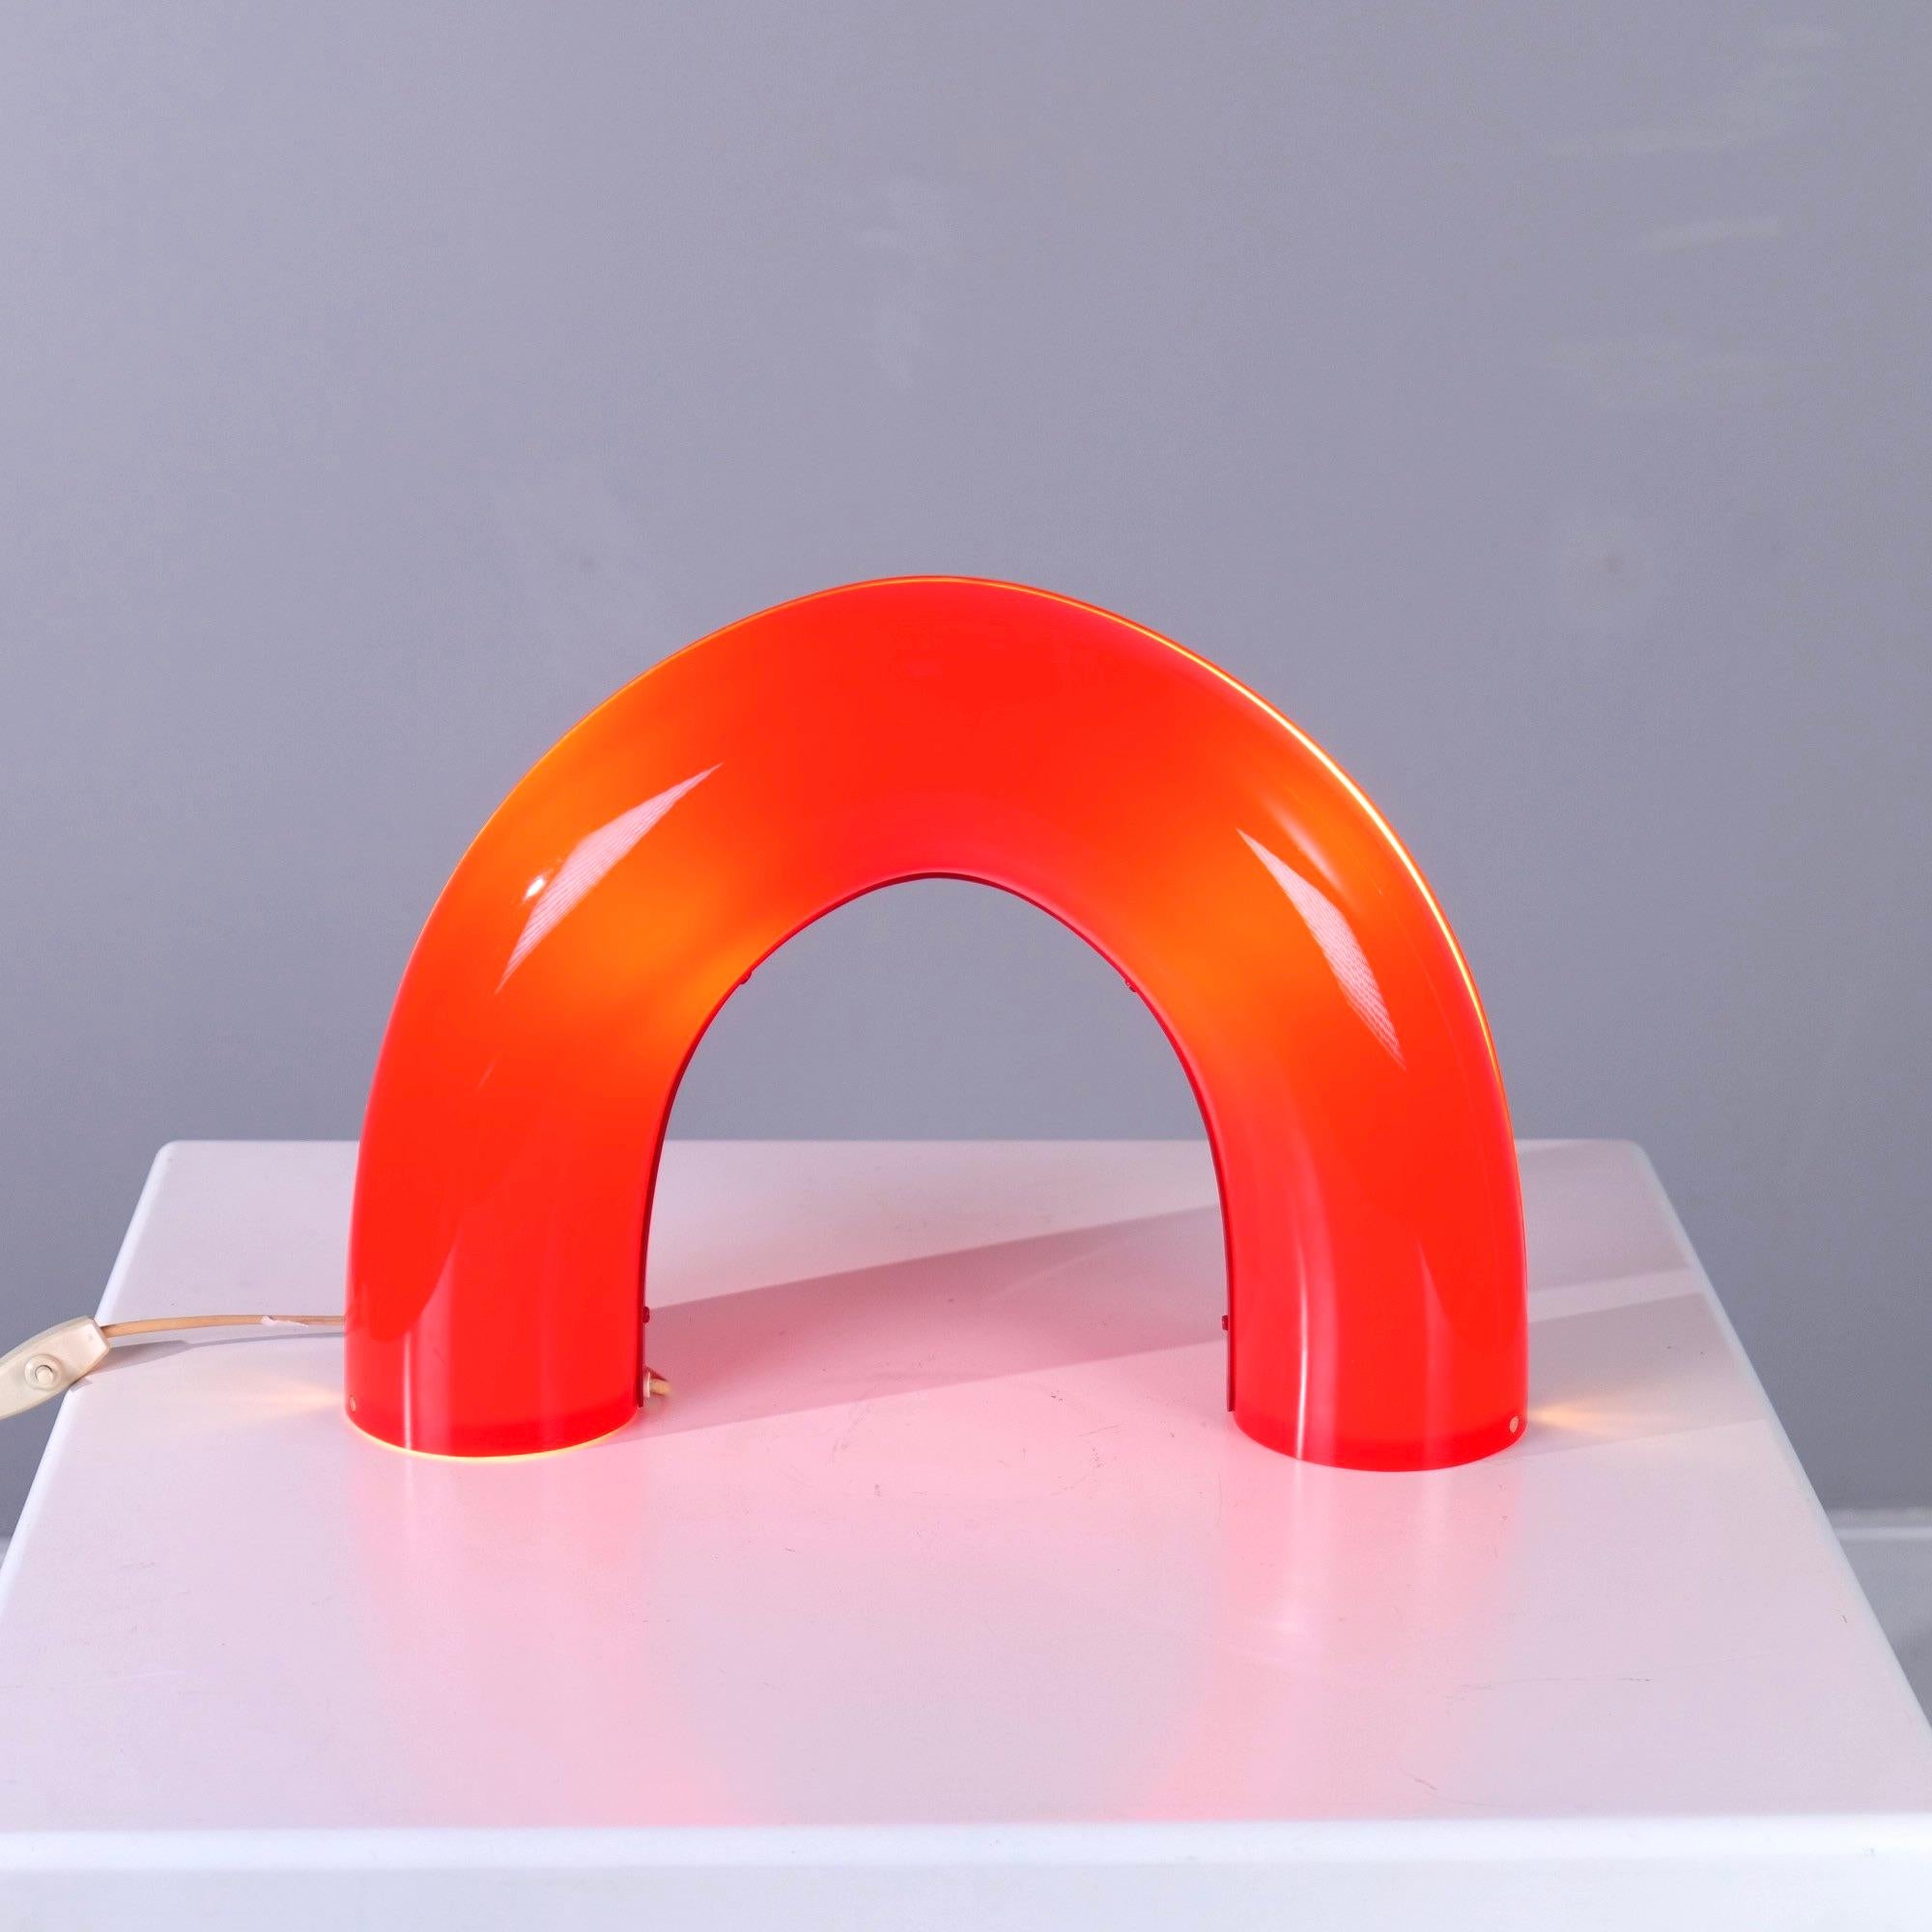 Temde red half ring desk lamp. The most rare Temde lamp.

1960's - Made in swiss

Very good& condition with signs of use.

No brakes or chips but minimal deformation.

dimensions:
33 cm heigh
42 cm width
13 cm